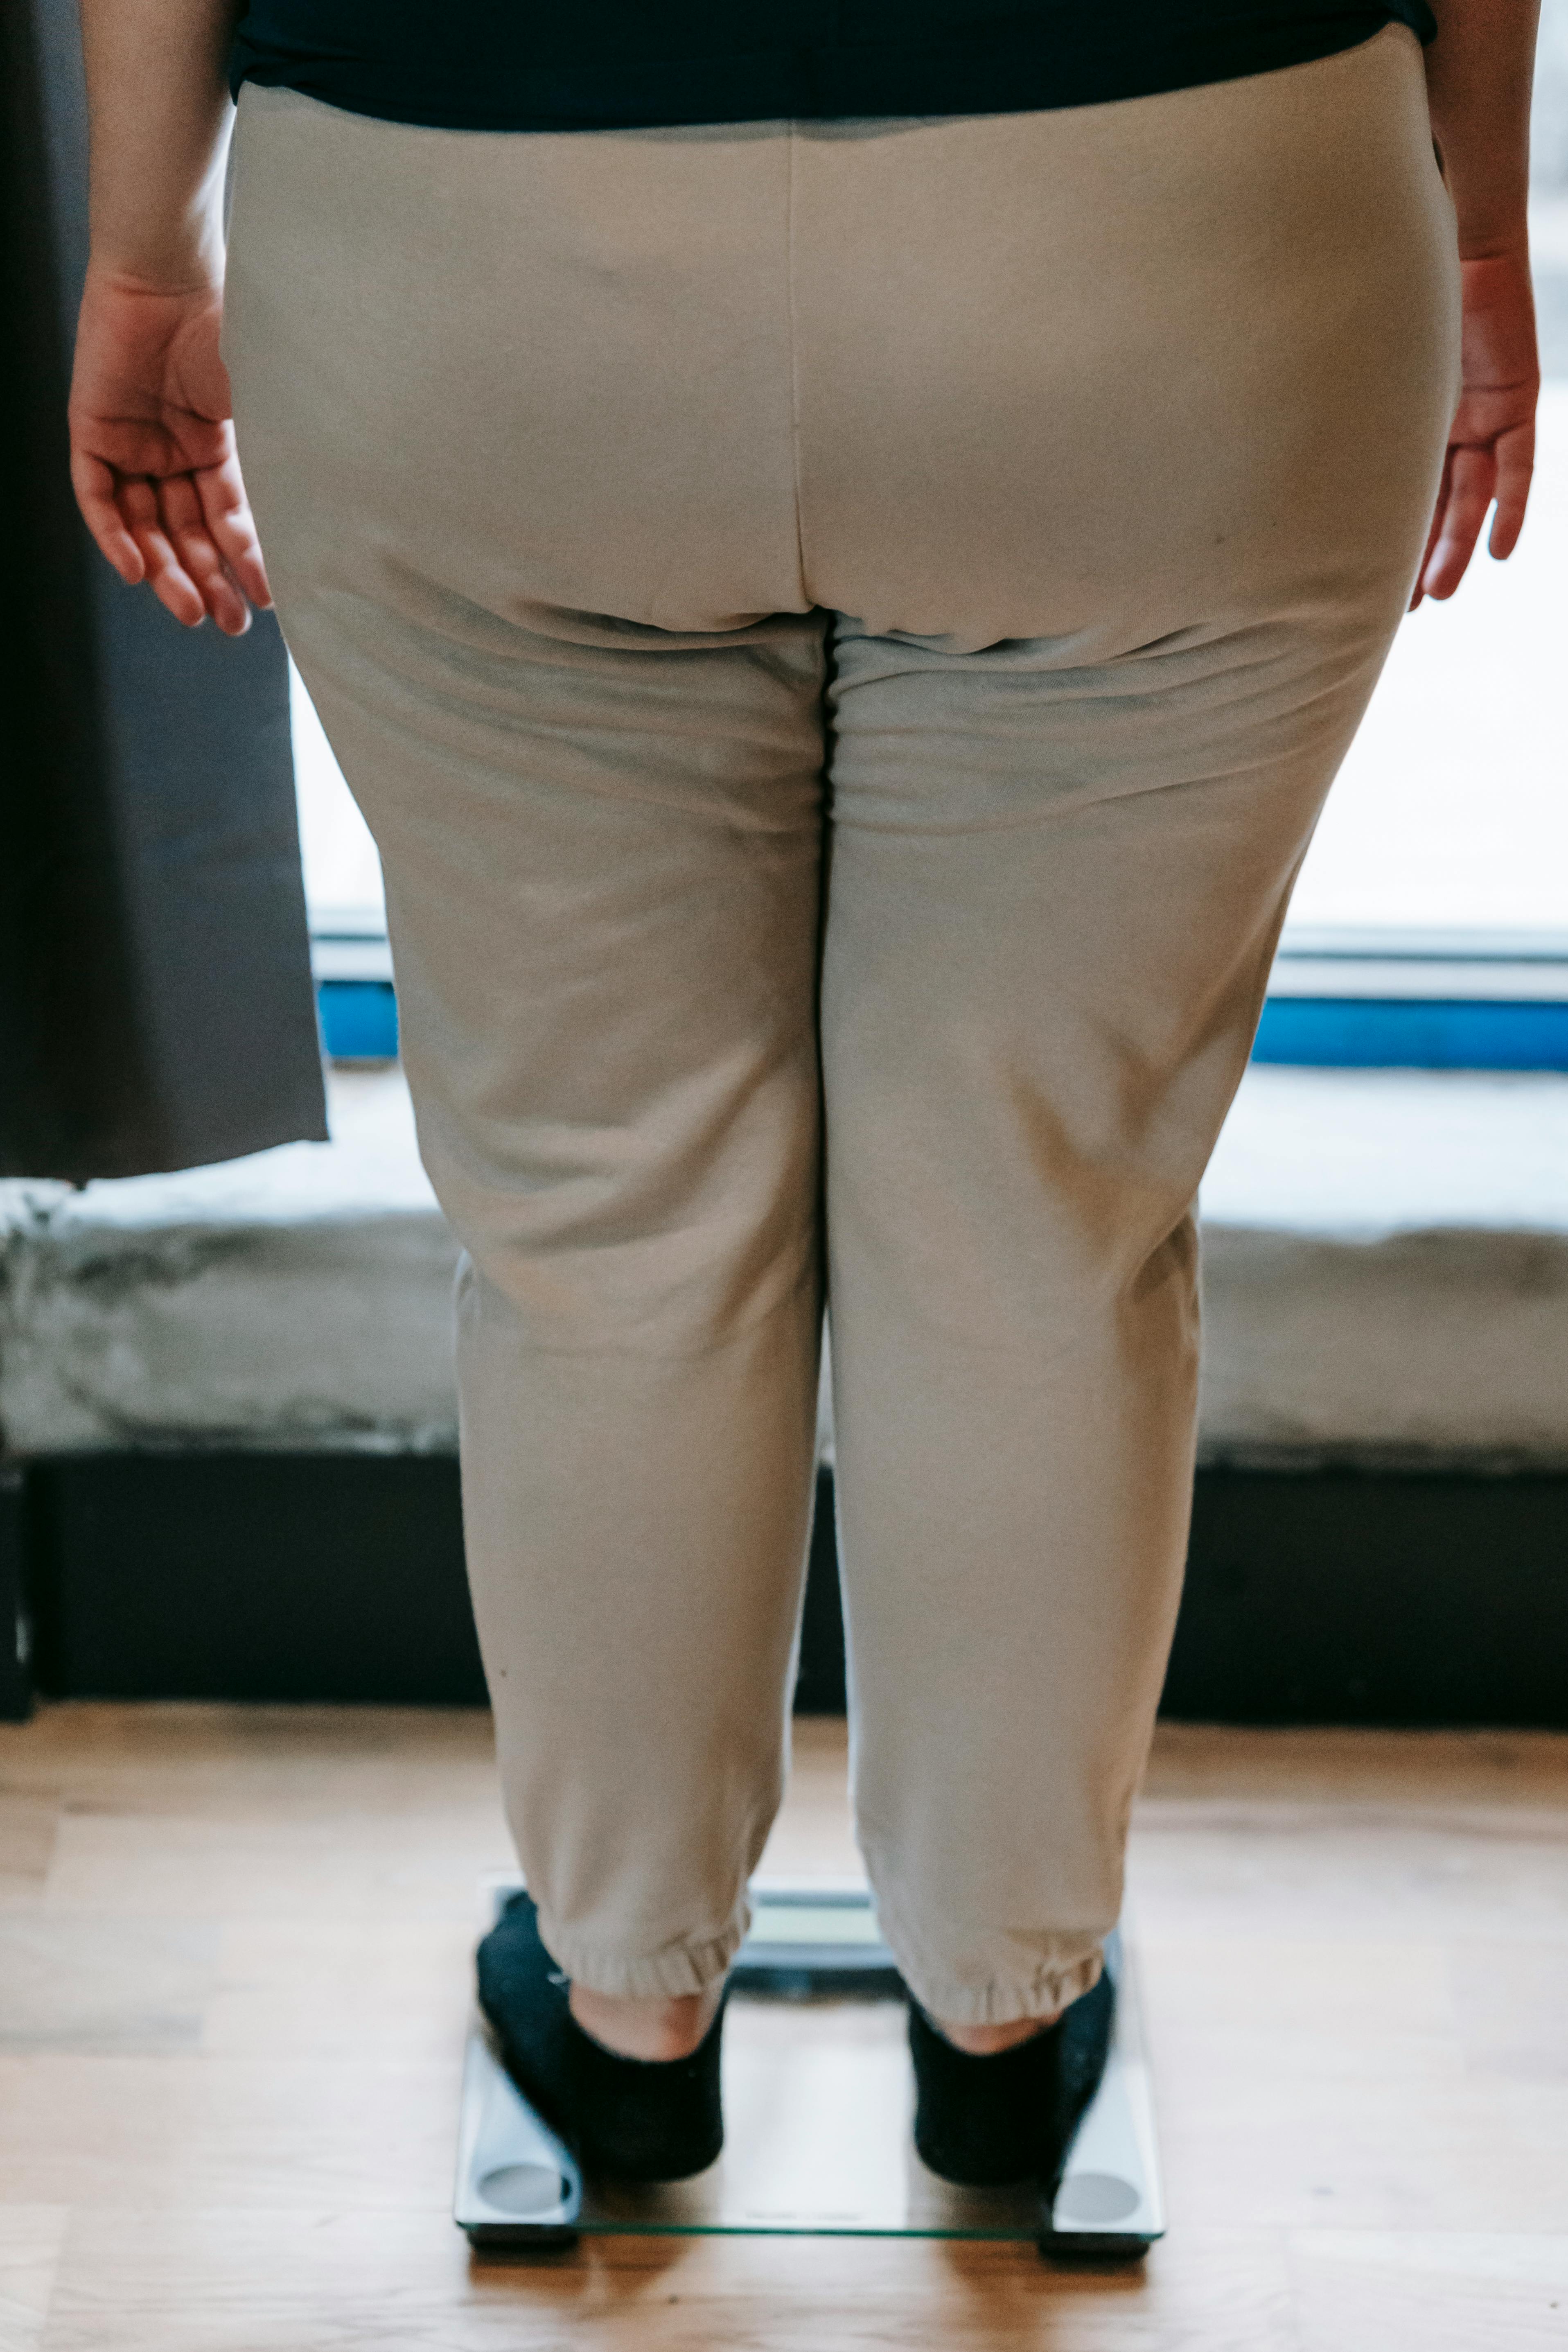 Weight scales for obese people 12215793 Stock Photo at Vecteezy